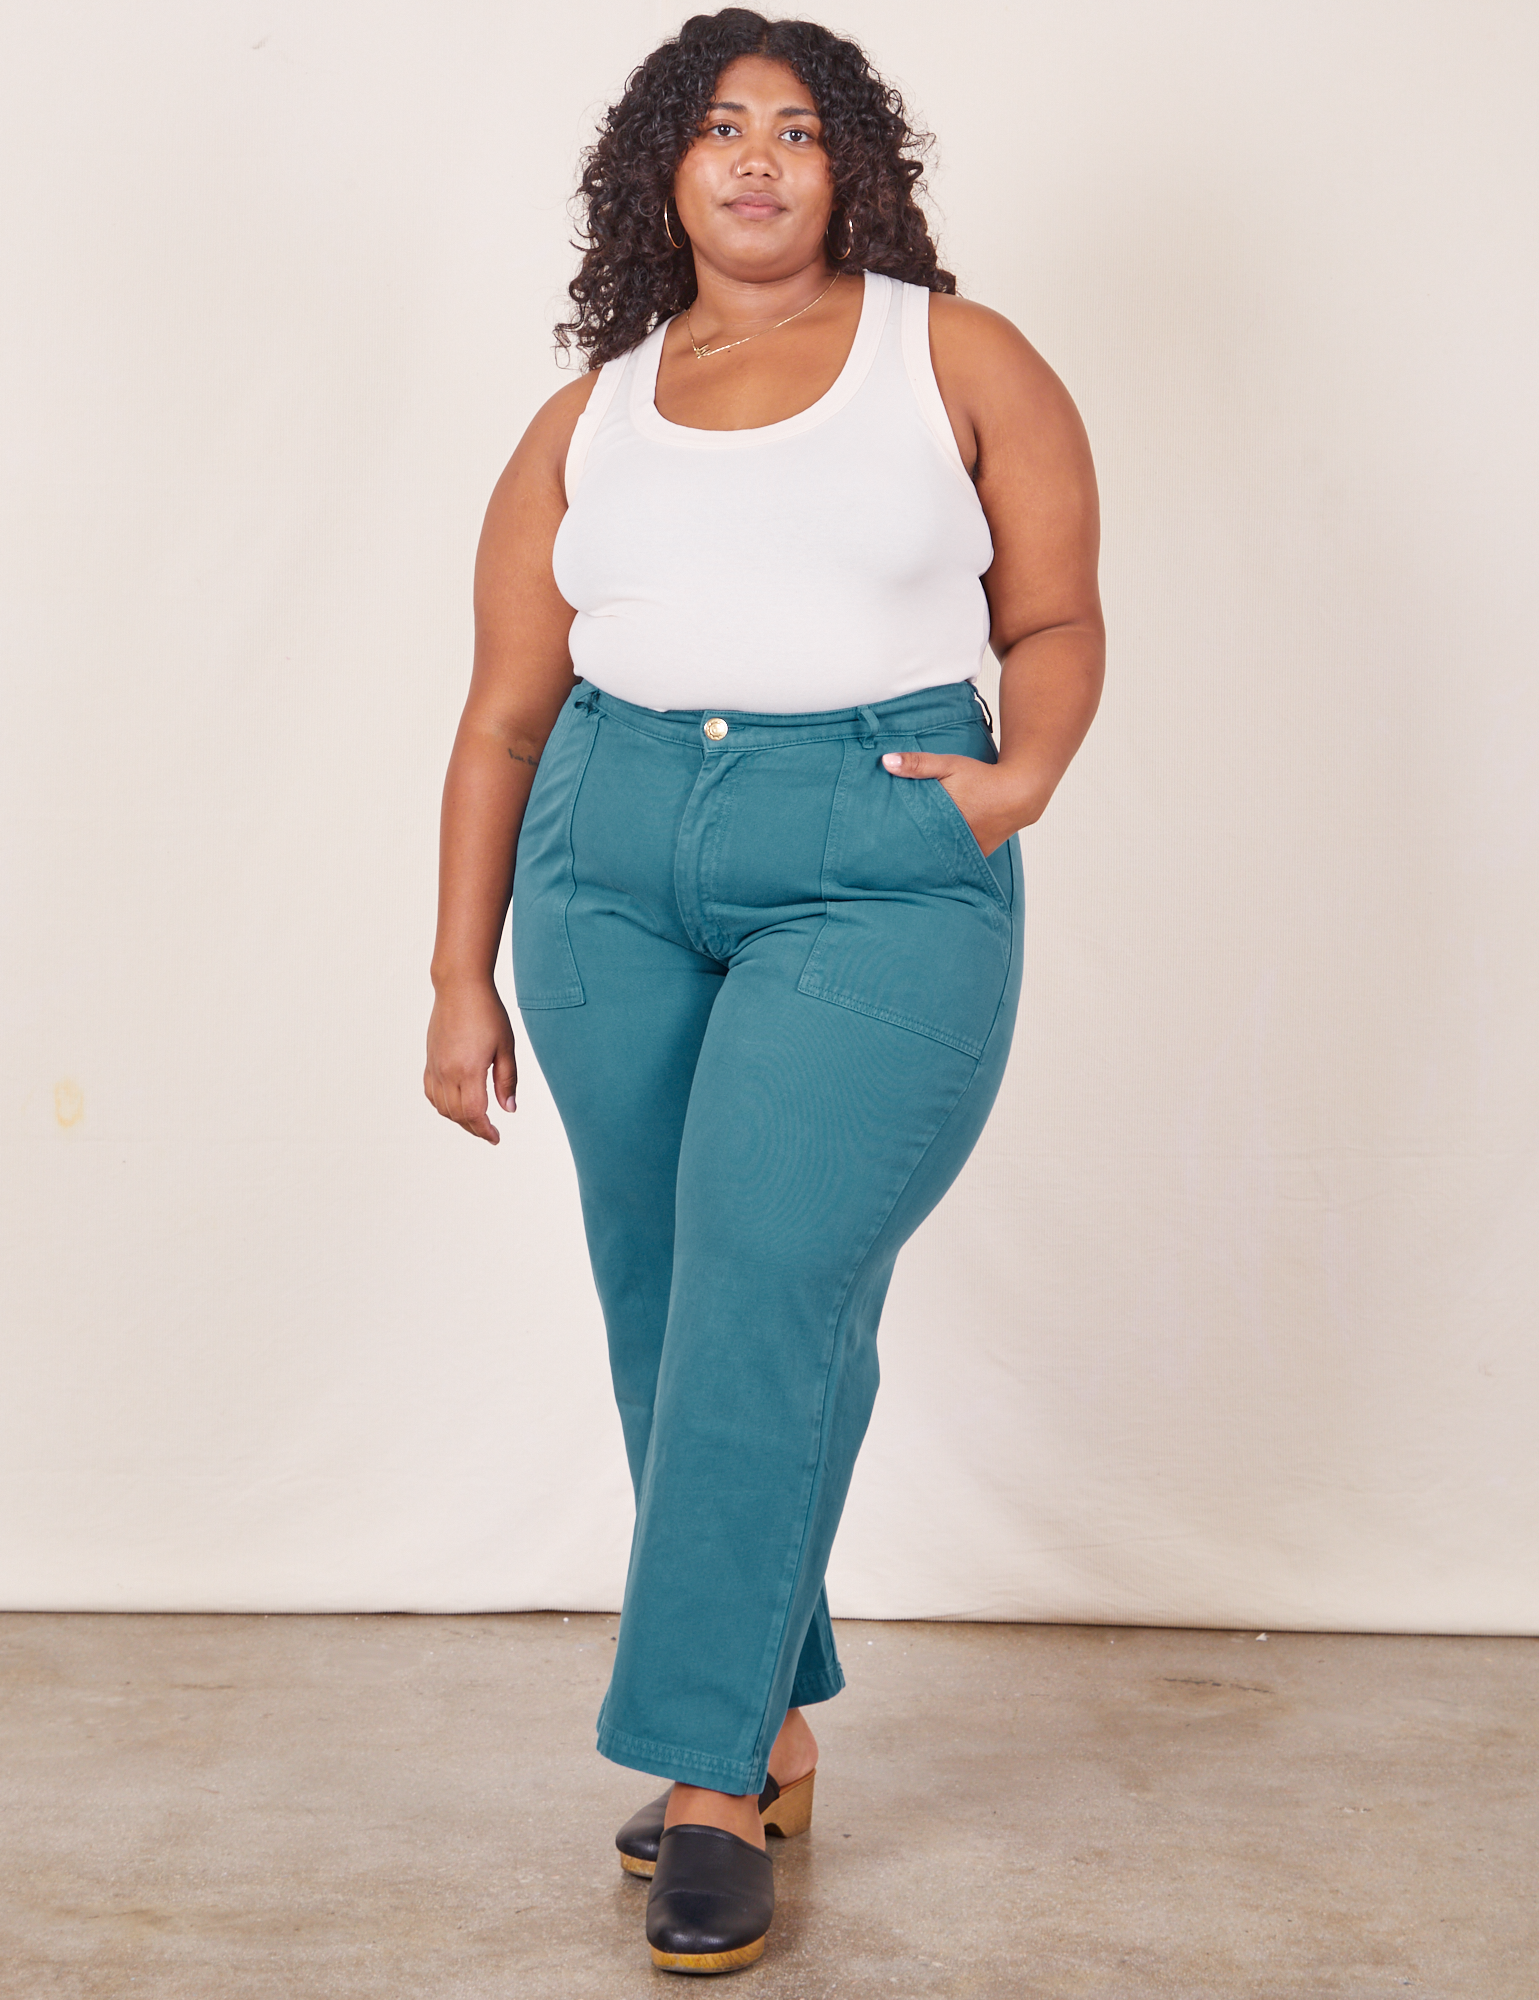 Morgan is 5&#39;5&quot; and wearing size 1XL Work Pants in Marine Blue paired with vintage off-white Tank Top